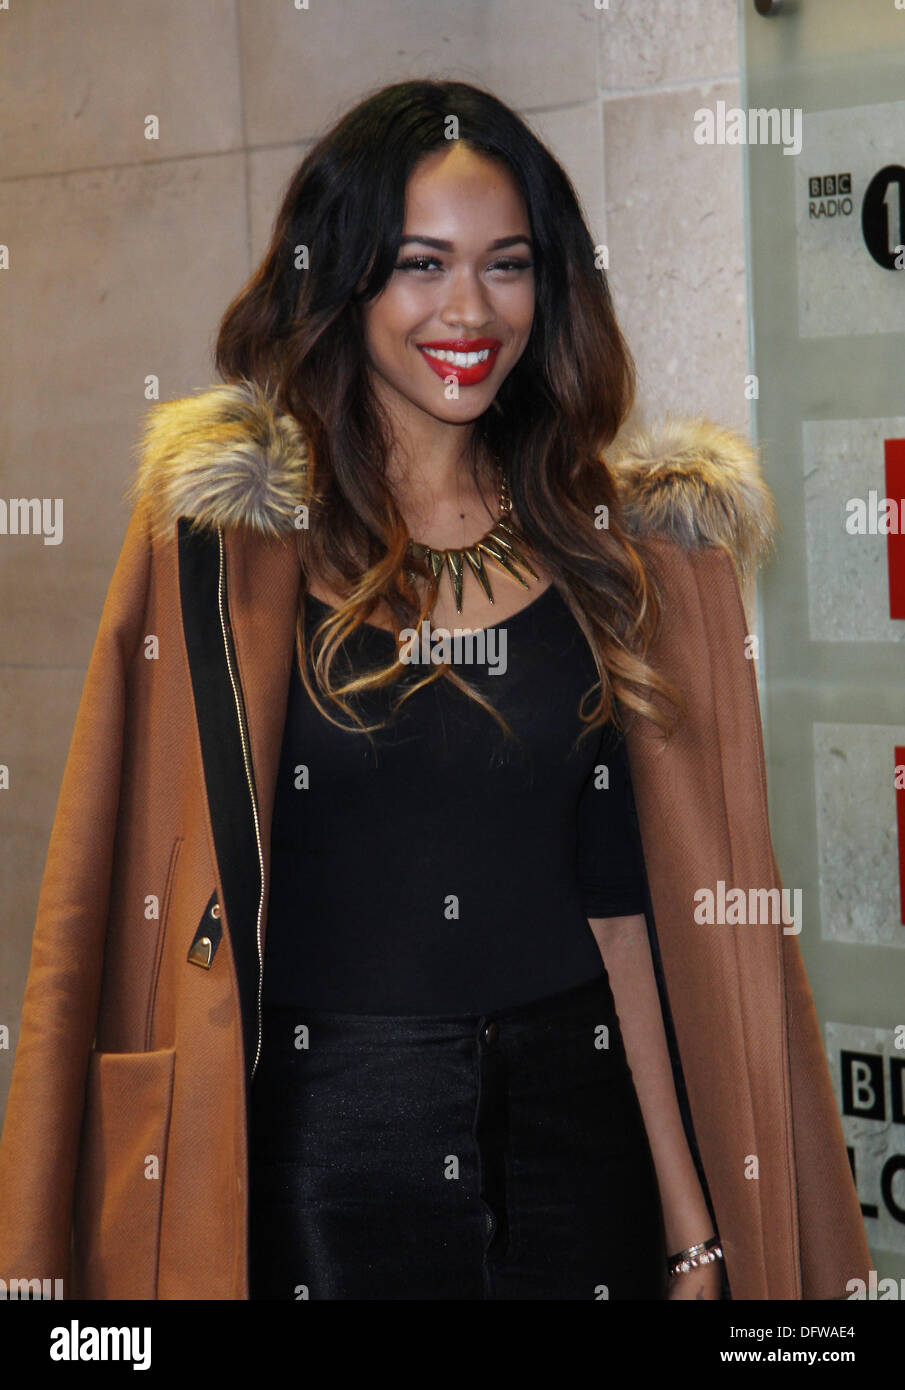 London, UK, 9th October 20113. Tamera Foster seen at the BBC radio one studios in London. Stock Photo